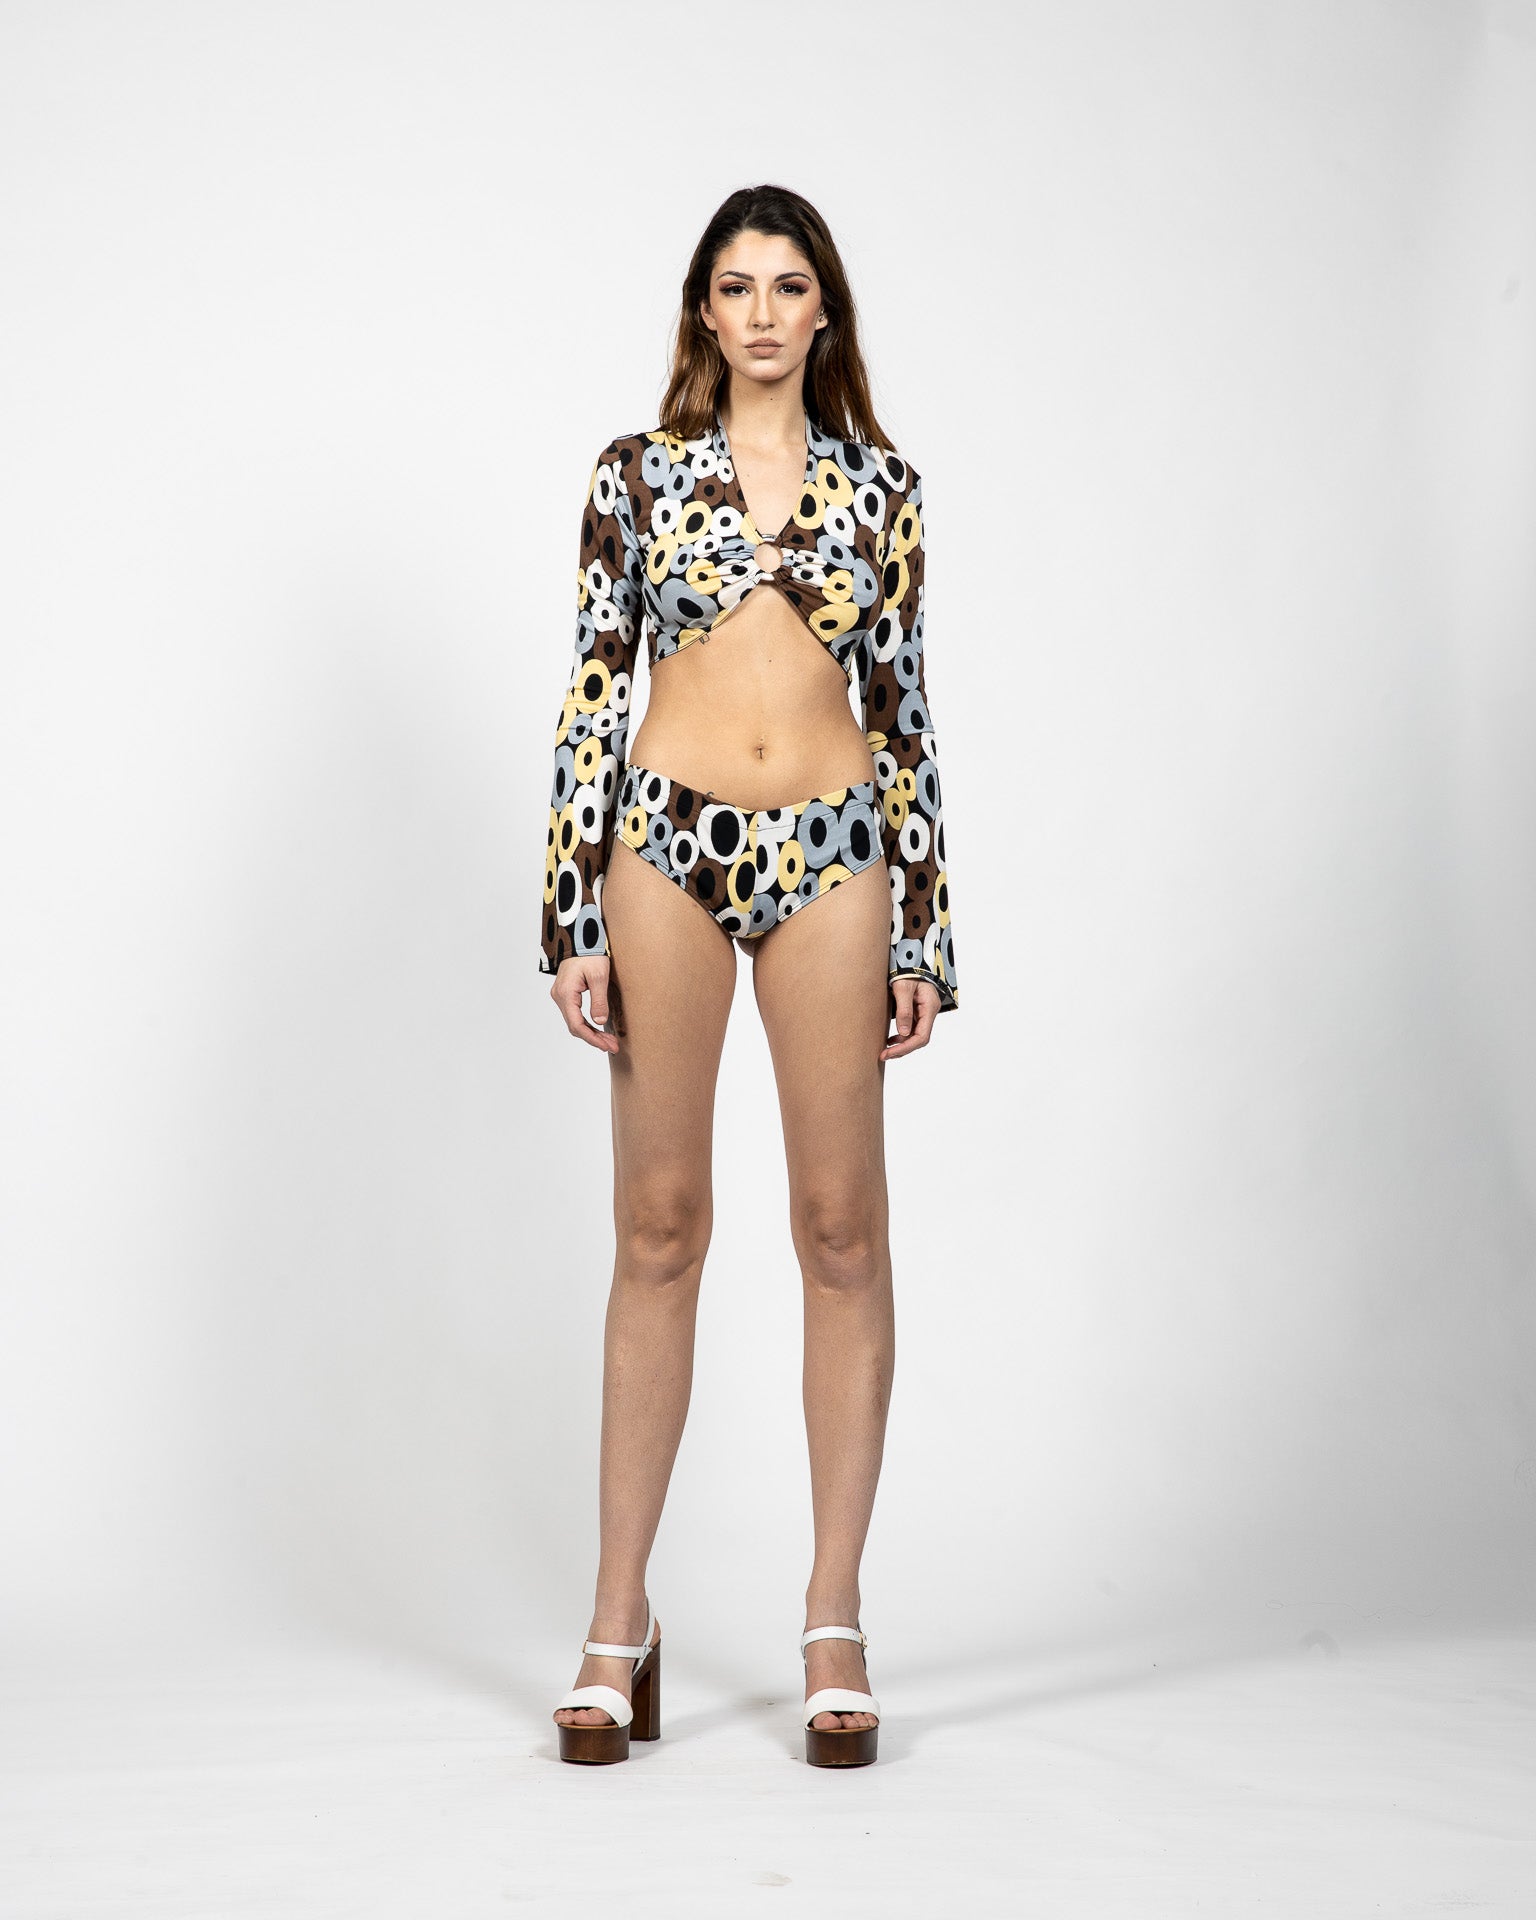 Printed Top With Matching Bottoms - Front View - Samuel Vartan